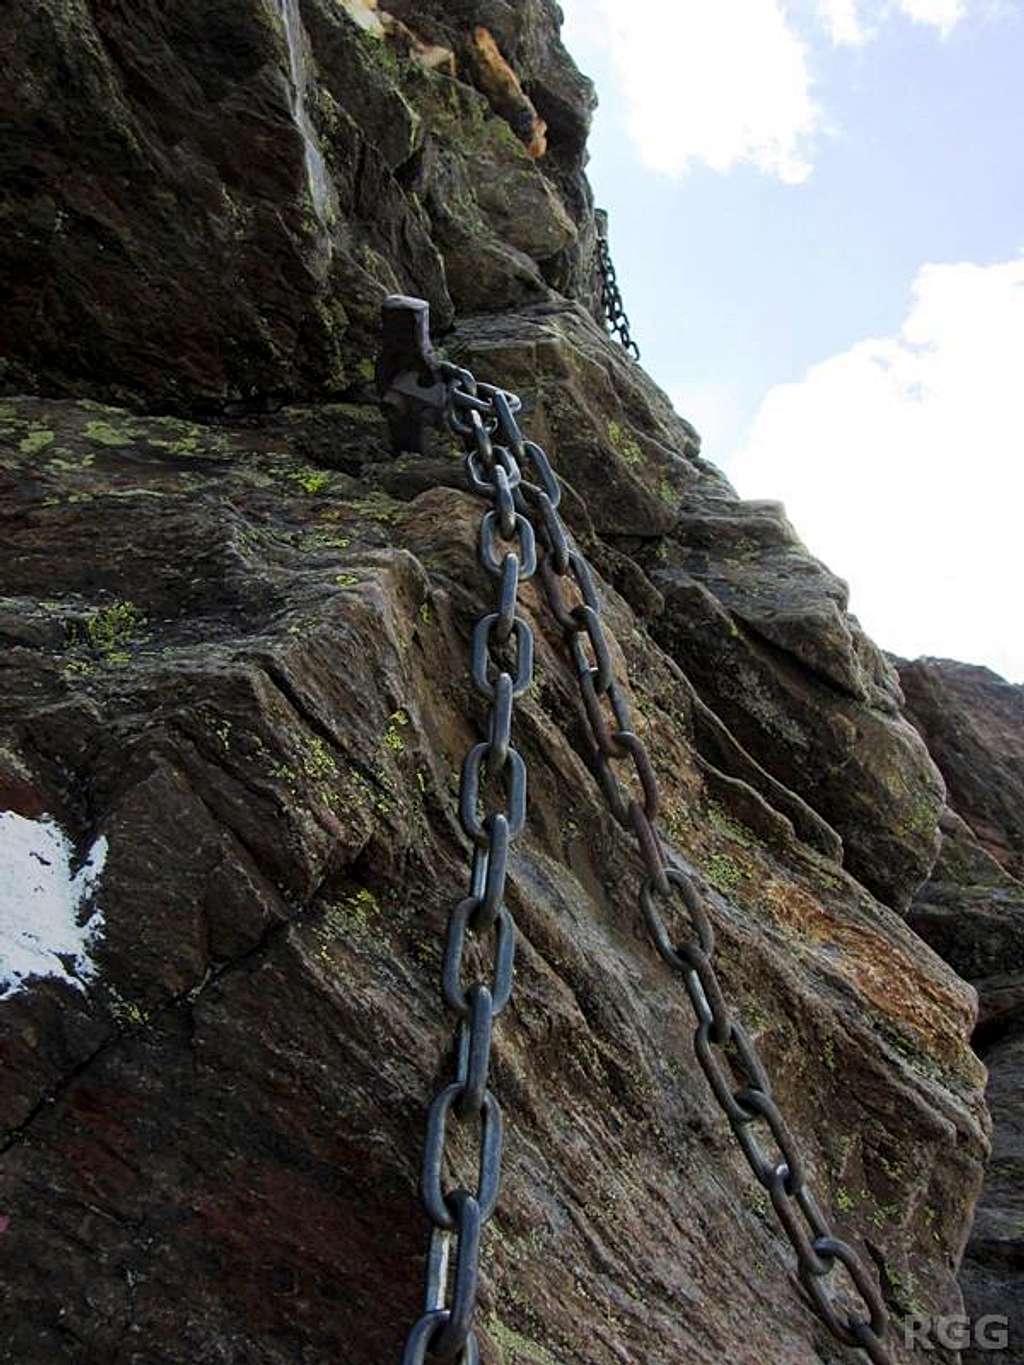 Chains securing some the tricky parts of the route up the Lazinser Rötelspitze